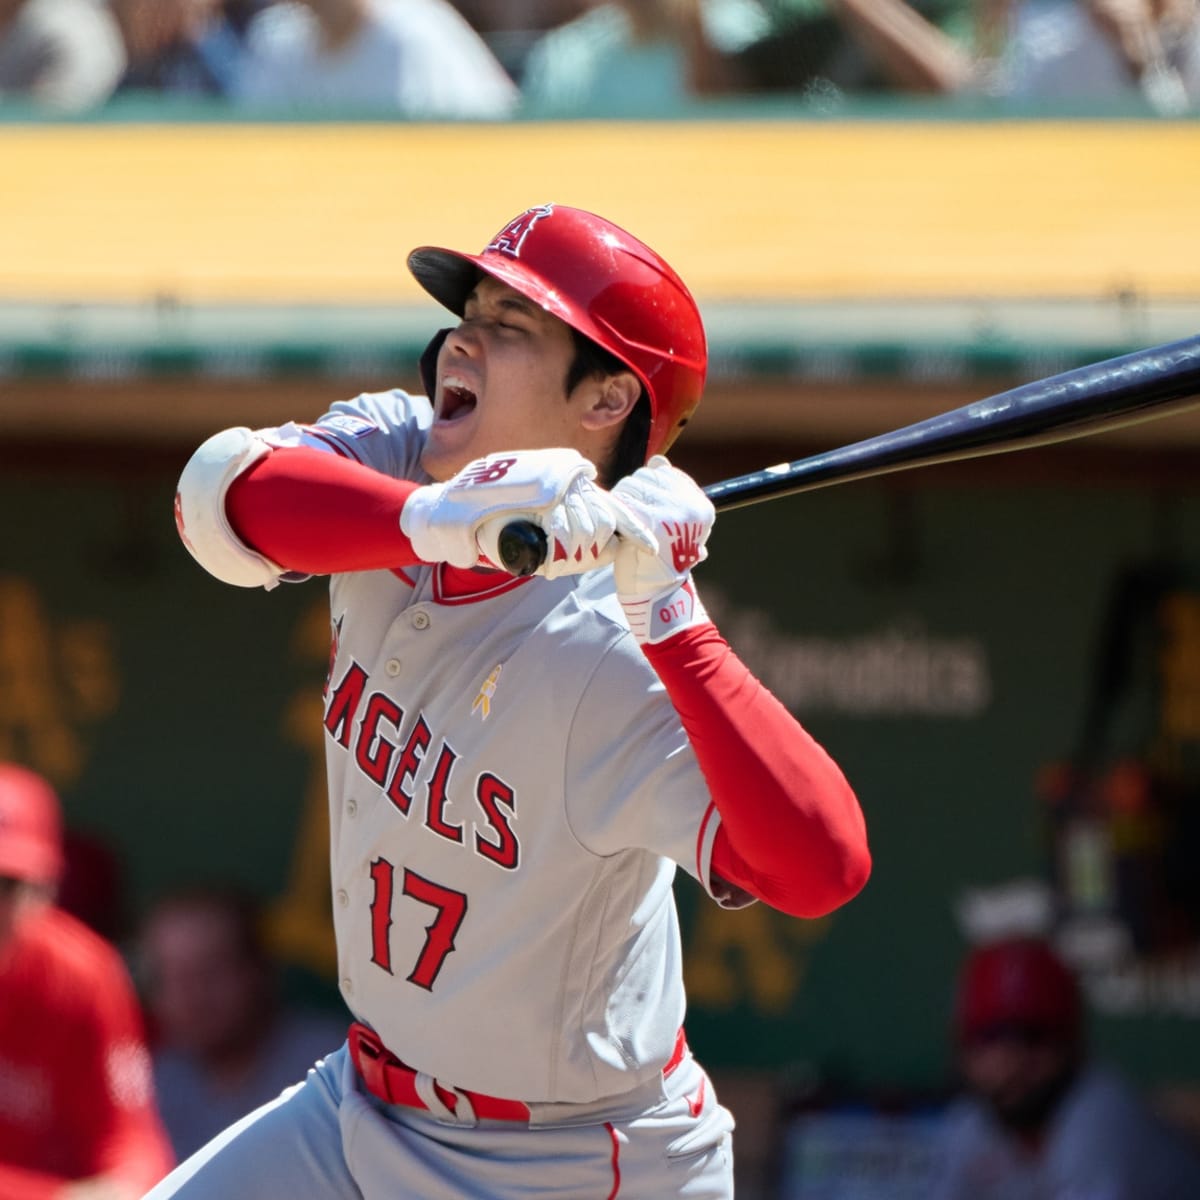 Missing games while hurt isn't part of Shohei Ohtani's plan - Los